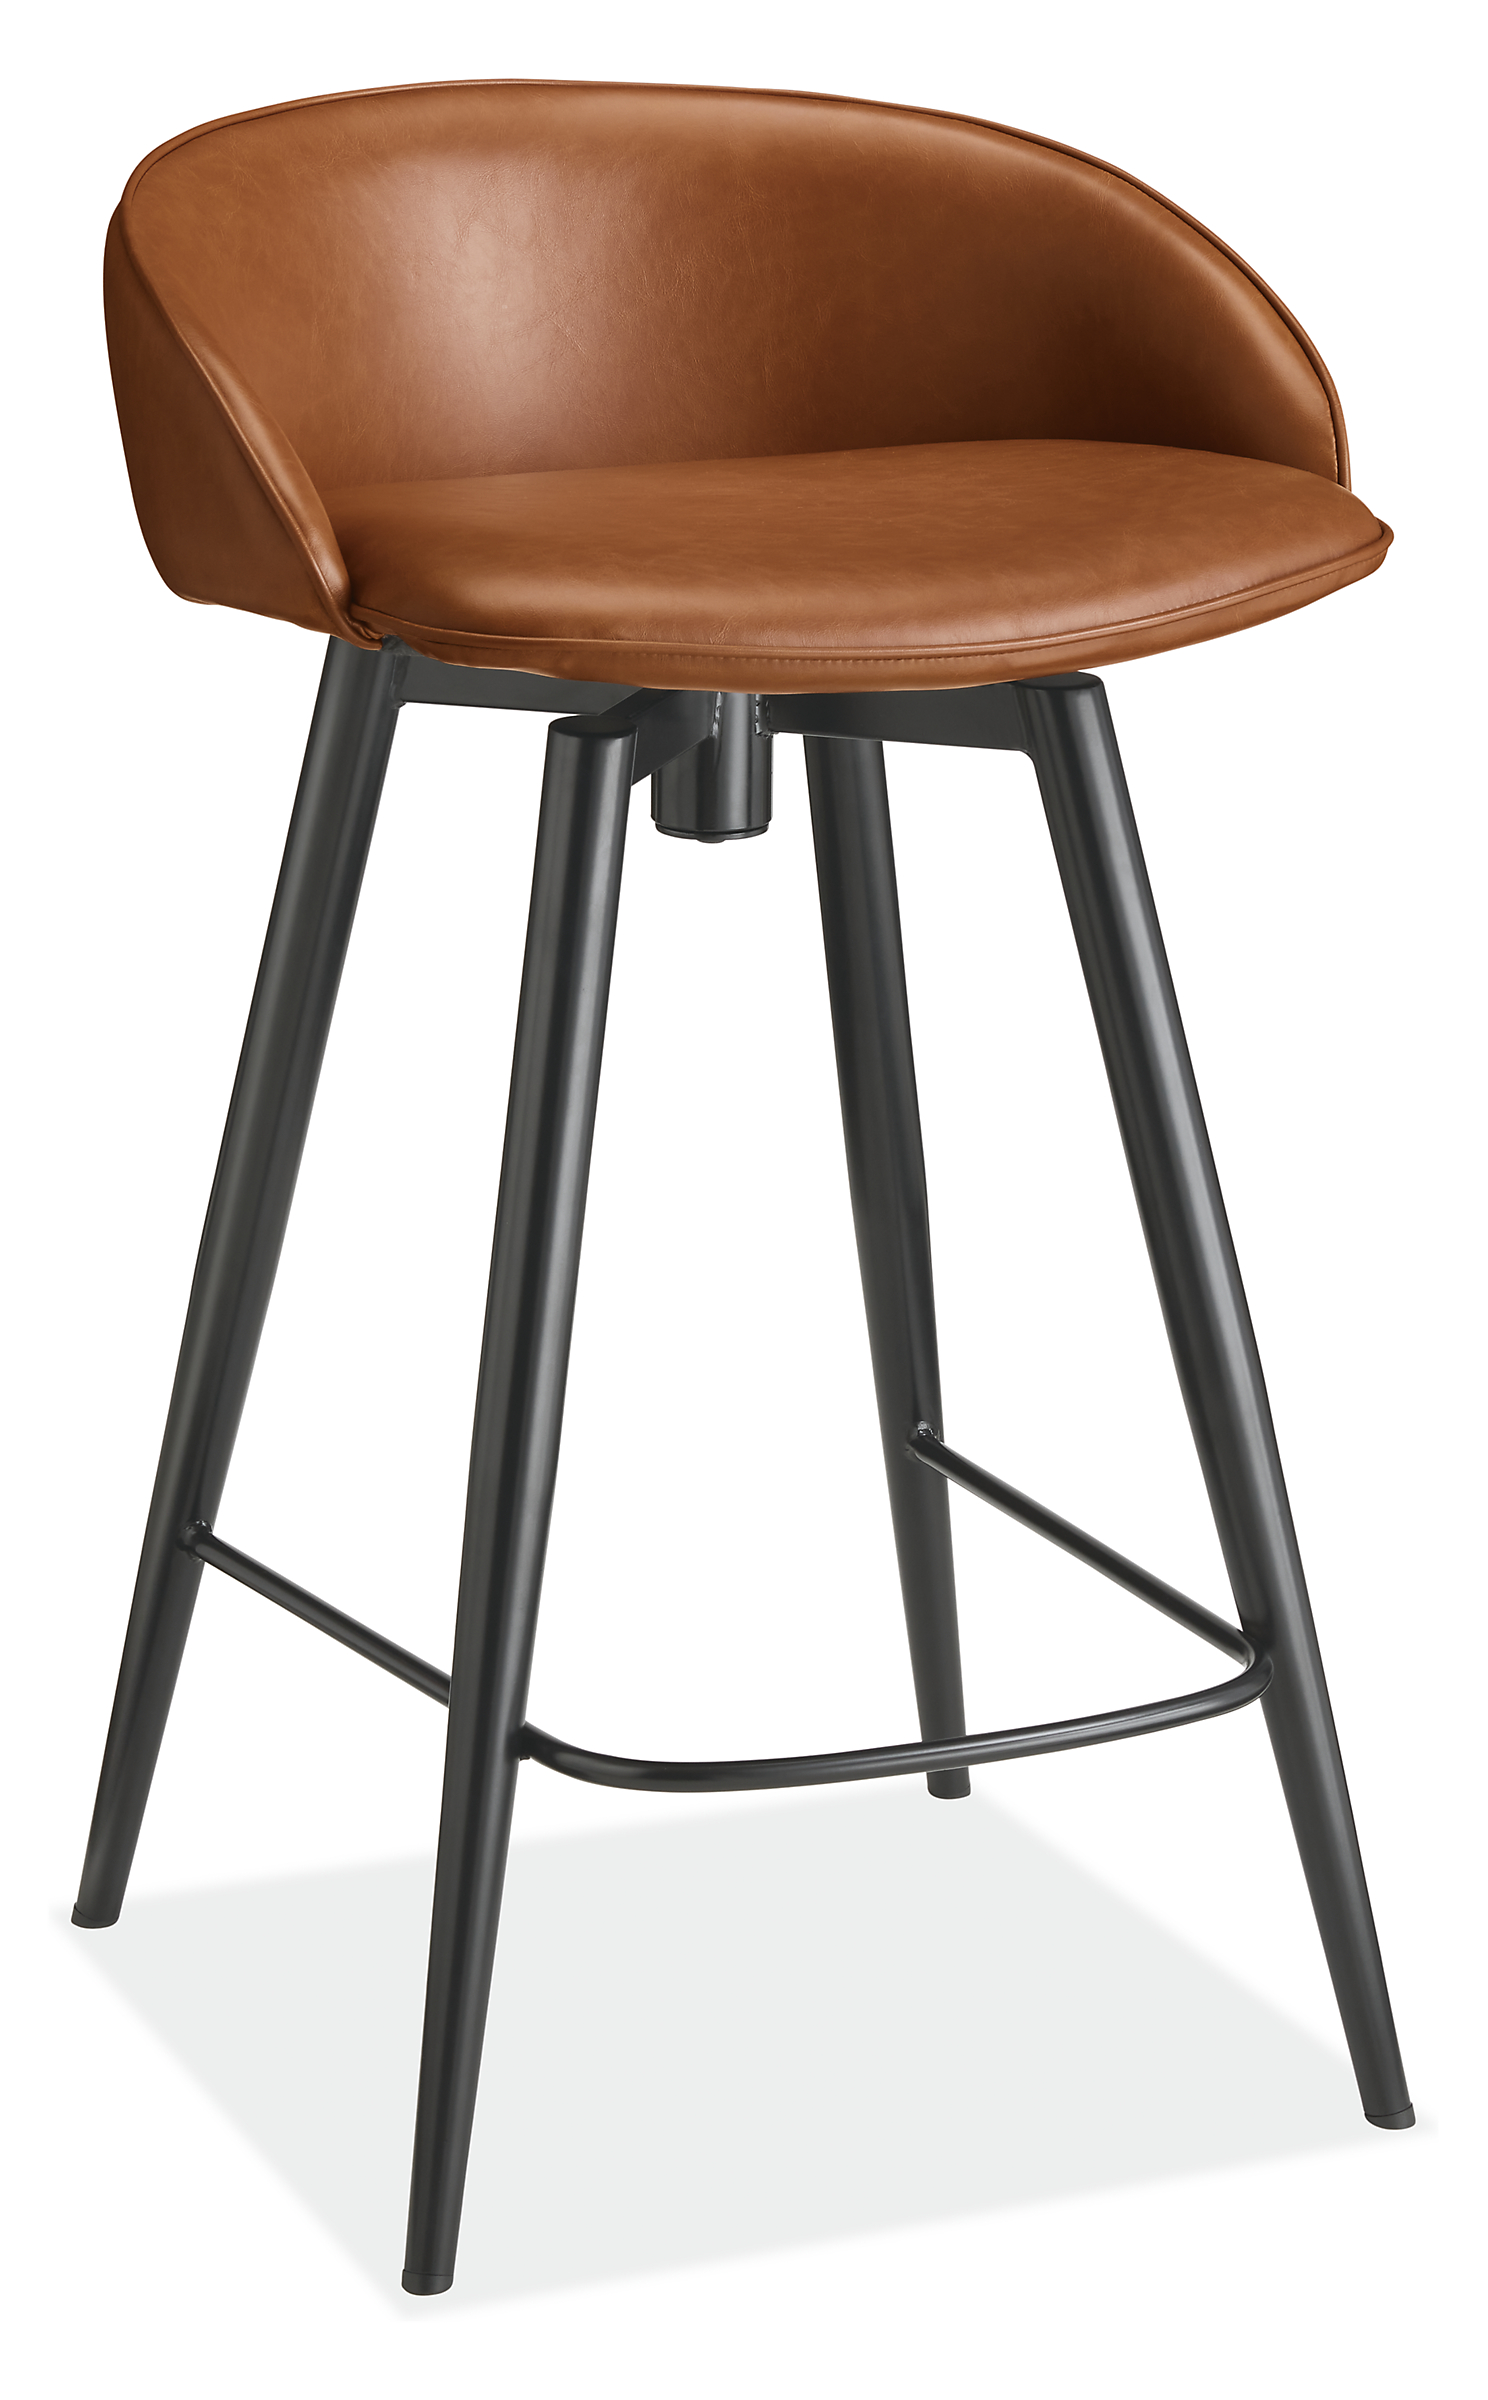 Sylvan Synthetic Leather Swivel Counter Stool